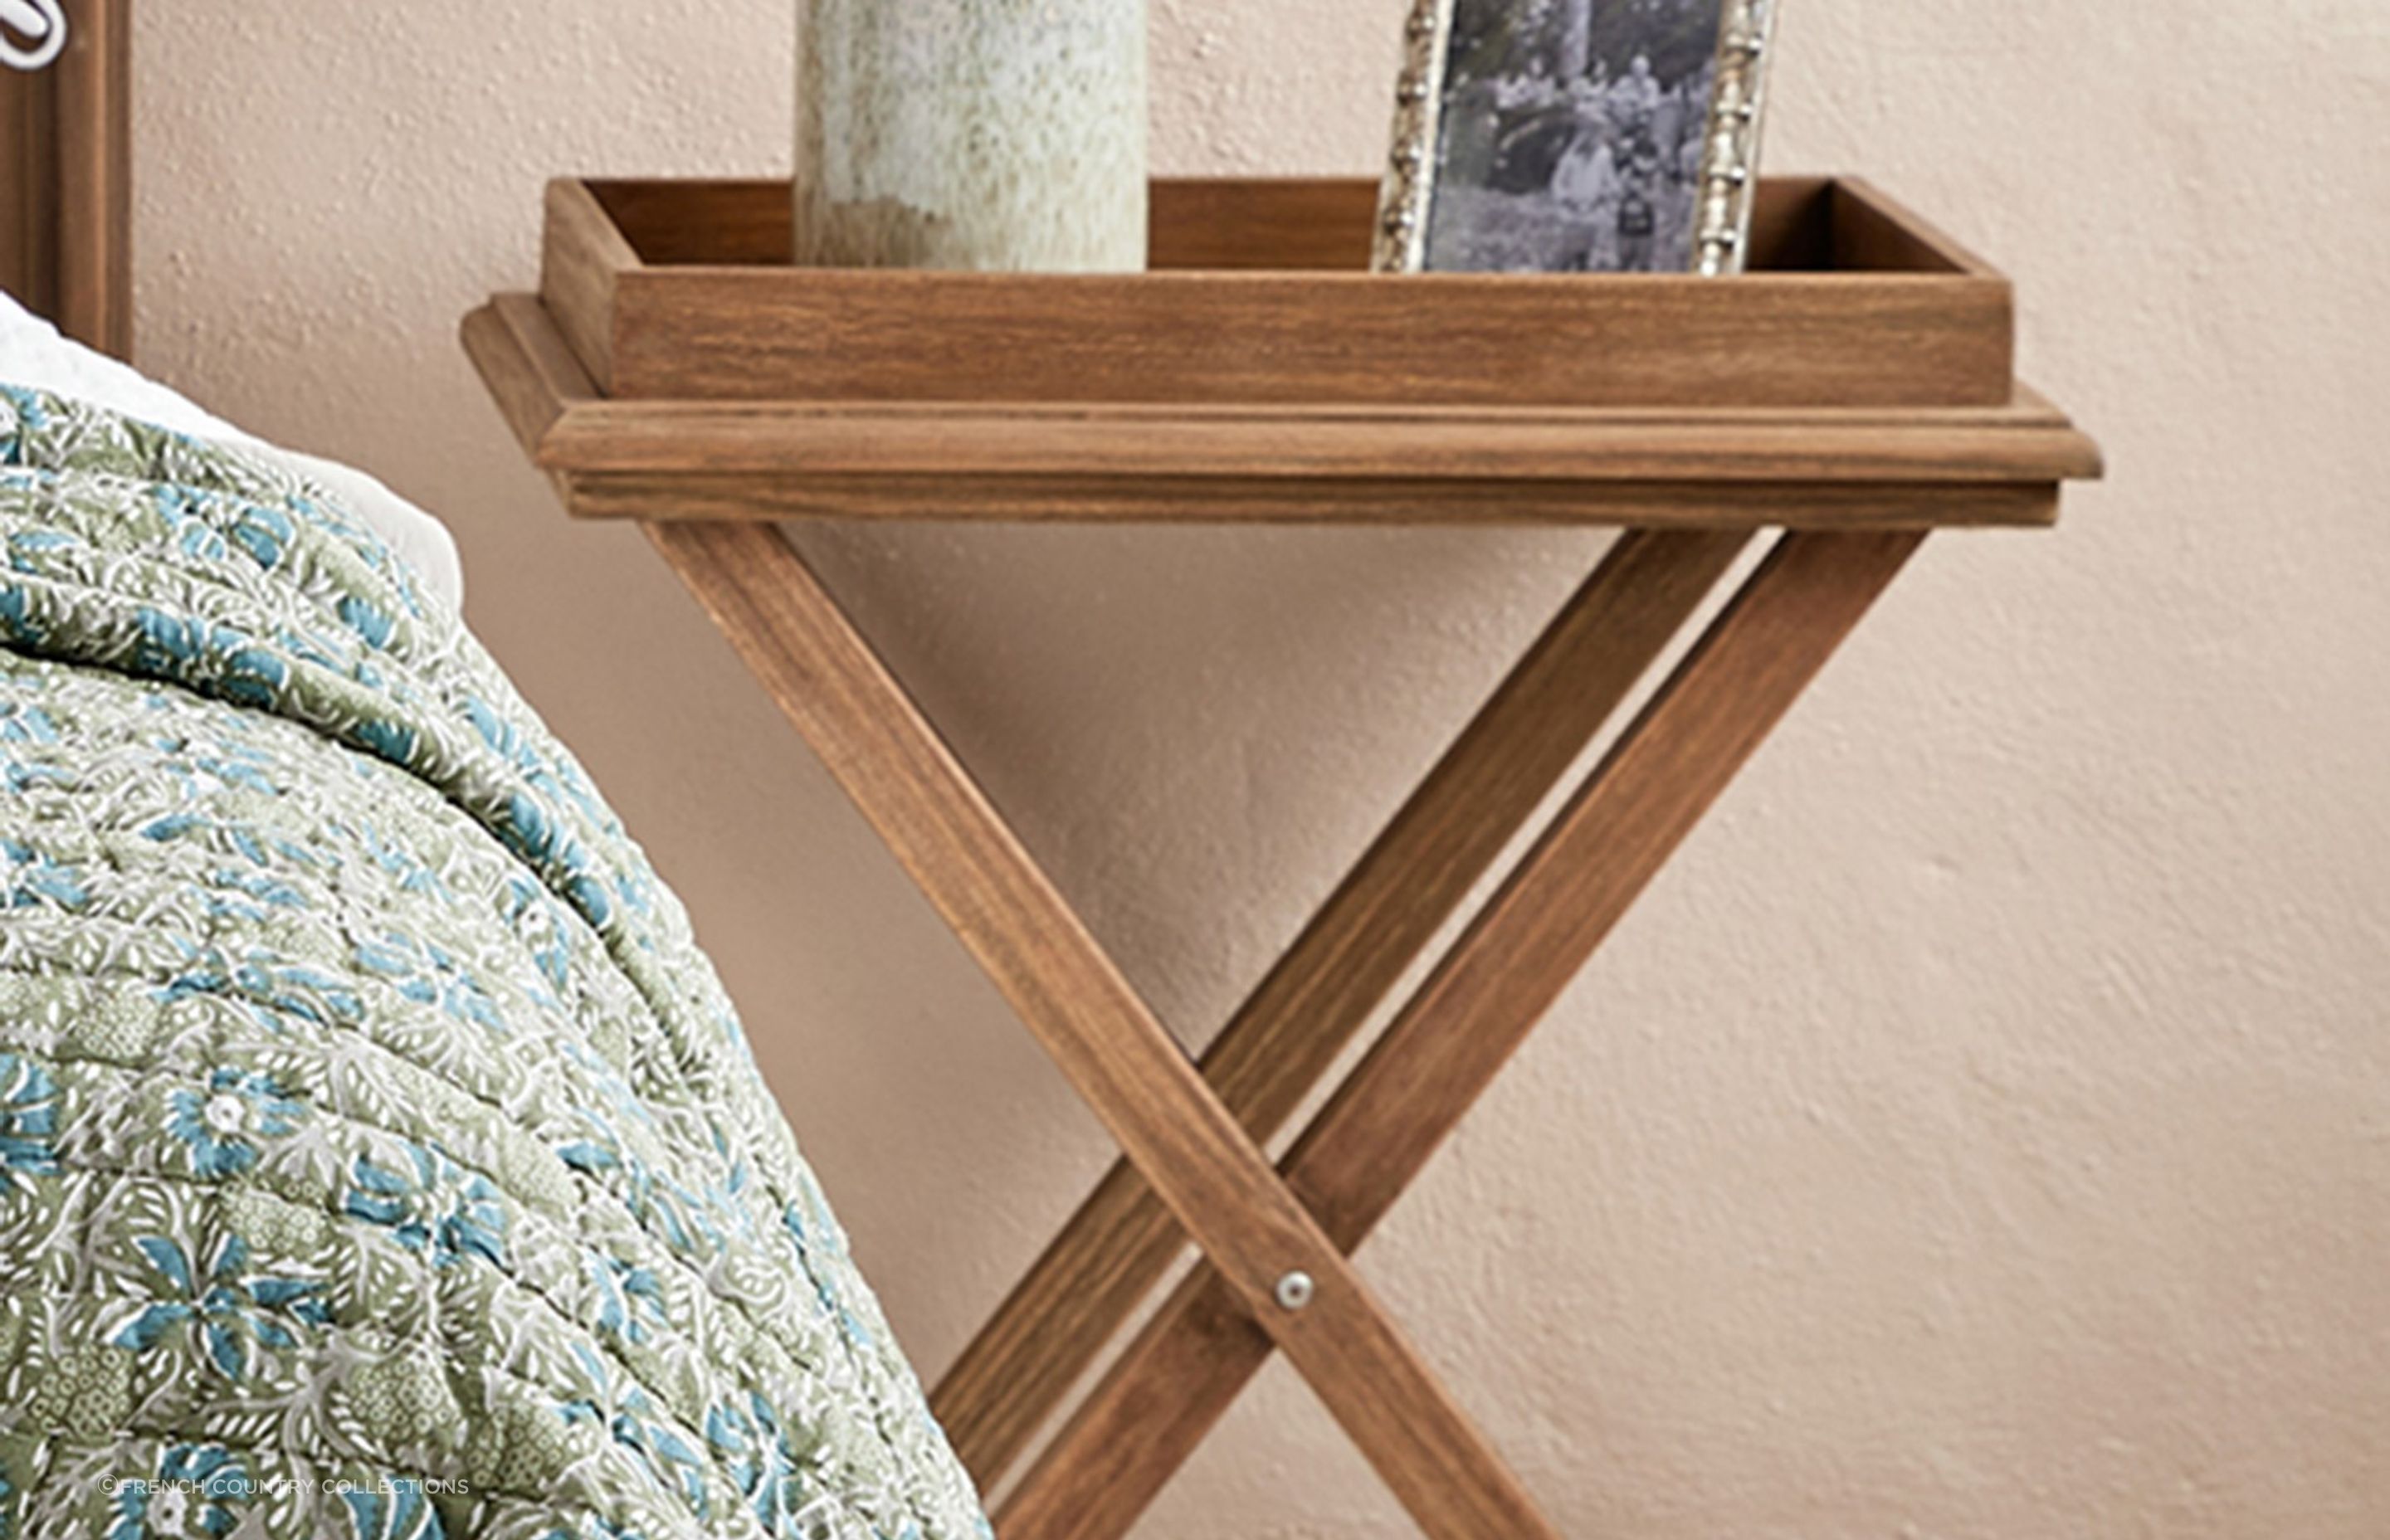 The rustic charm of the Cross Leg Tray Table makes it perfect for a relaxed setting.